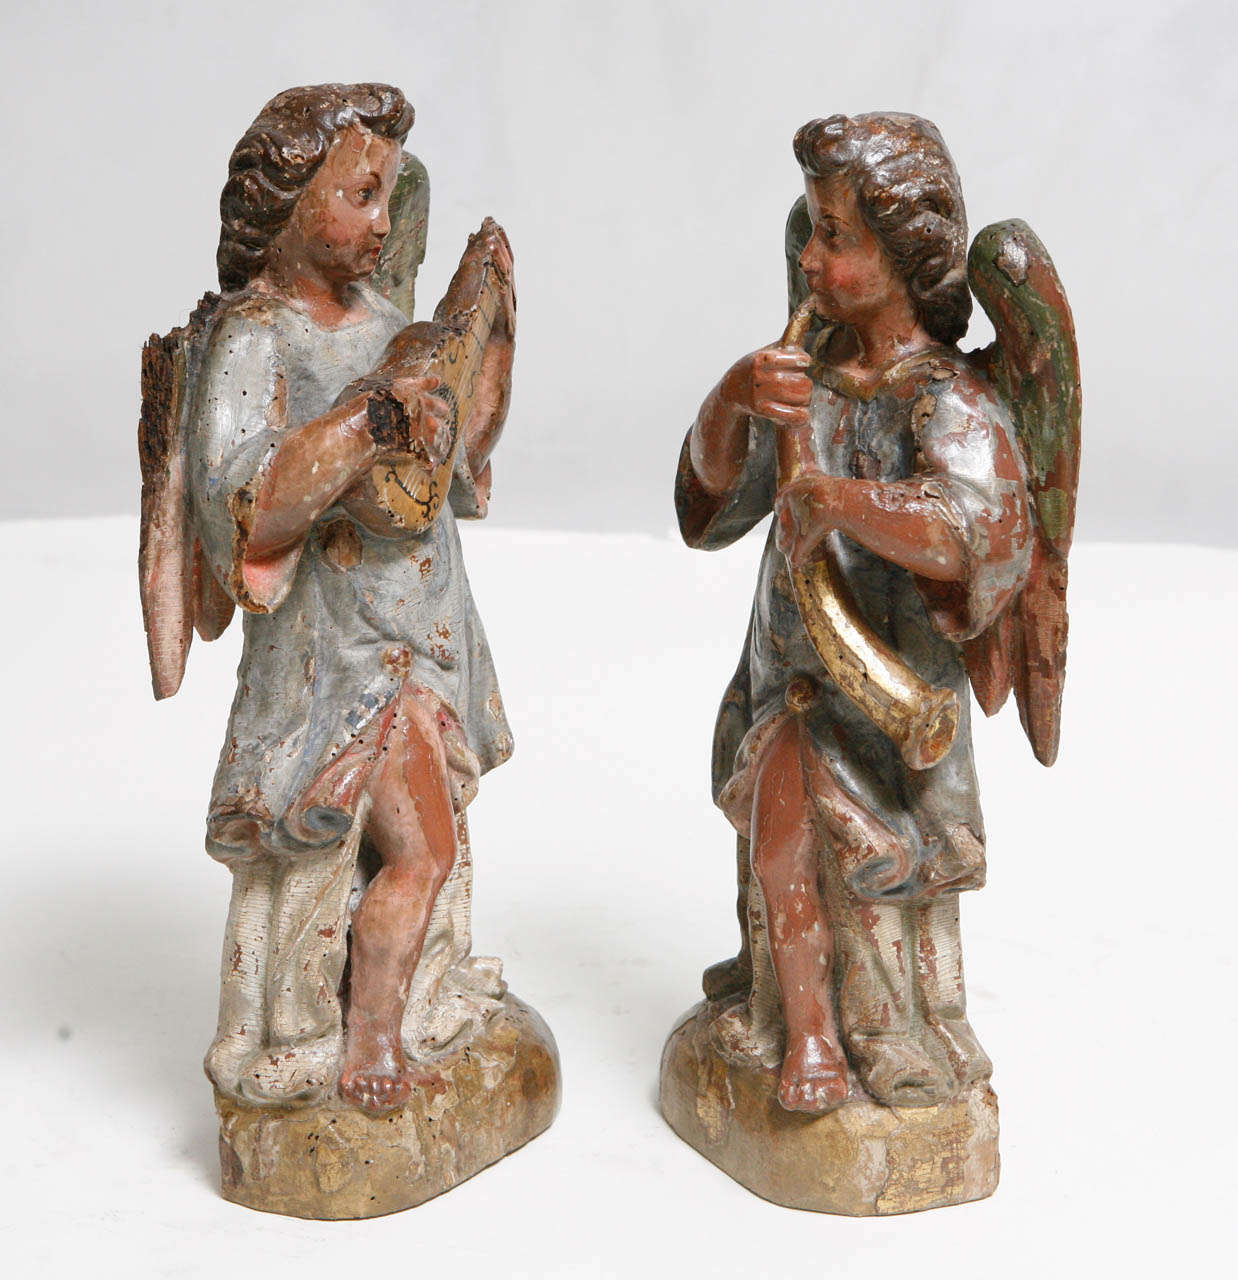 18th c. Pair of Italian Polychromed Winged Angels playing Instruments. The base measures 5.5 inches